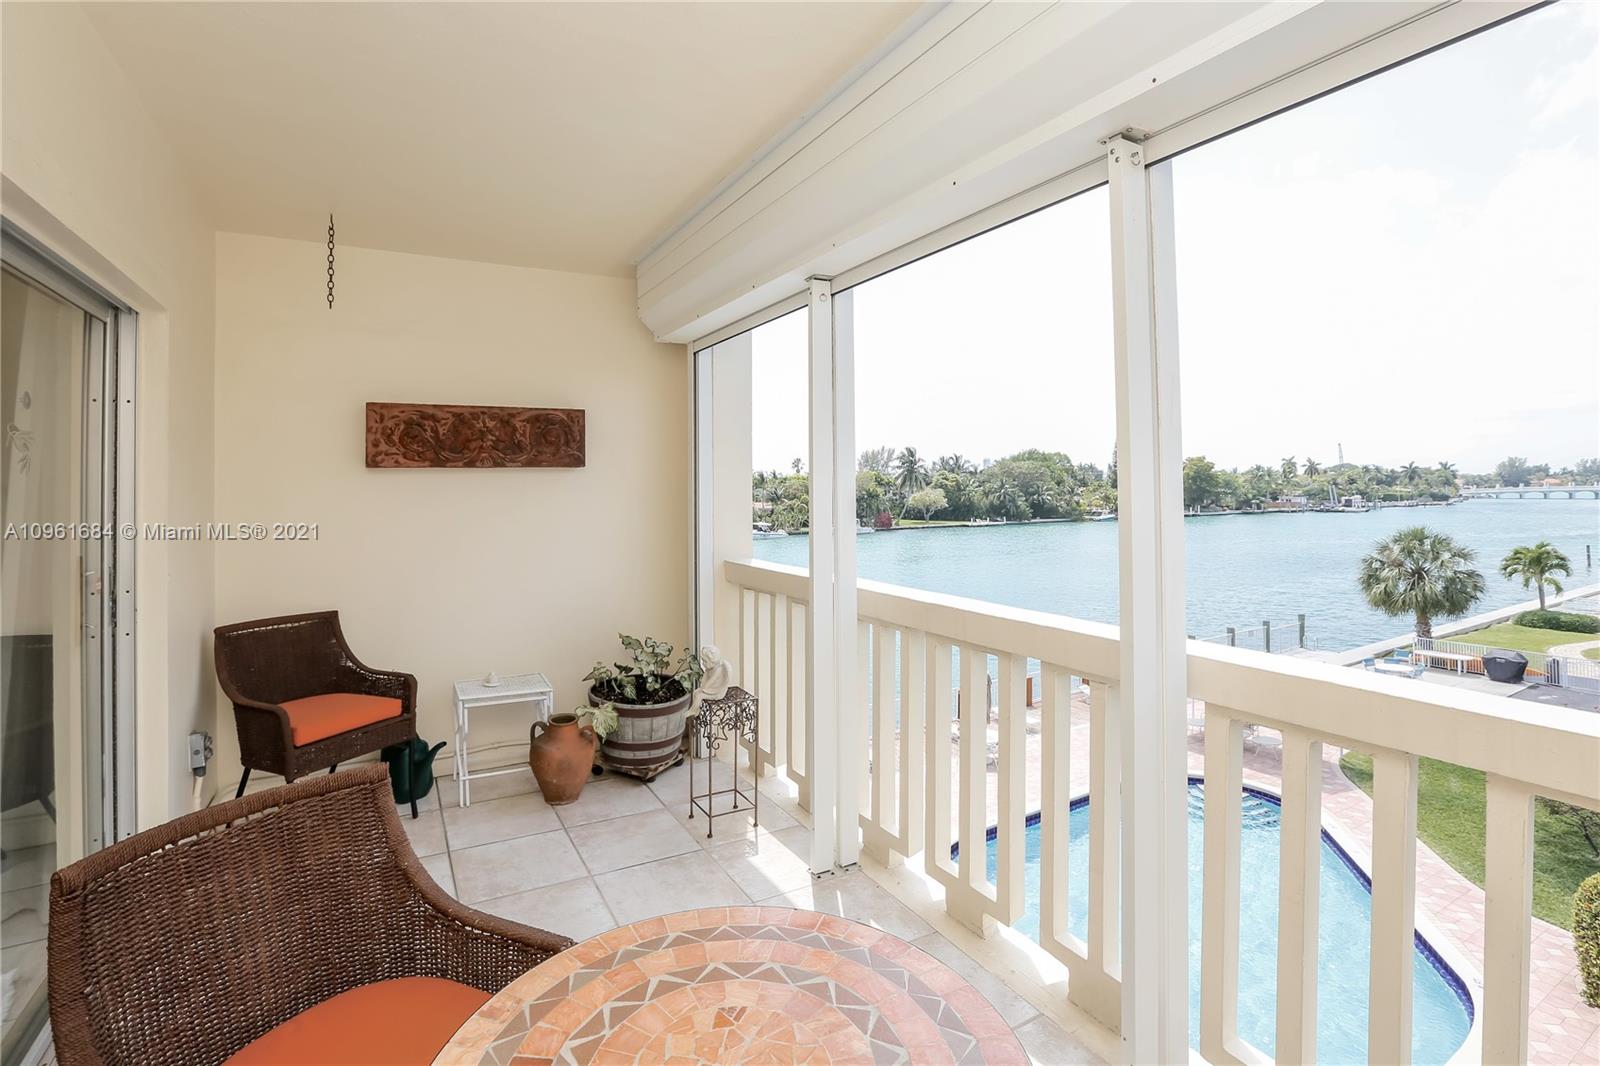 Spectacular waterfront corner unit with over 1700 sq ft of living space overlooking the iconic Indian Creek Waterway and Bridge. This perfect bayfront home features beautifully updated marble baths, electric hurricane shutters, large kitchen and grand living spaces. Enjoy water views from every window and amazing sunrises. Building amenities include heated pool, gym, private parking and oversized climate control storage. HOA includes high speed internet and cable. Located within walking distance to beaches, Bal Harbour Shops, fine dining, houses of worship and top rated K-8 school. NO LONGER 55+ COMMUNITY. NO AGE RESTRICTION.